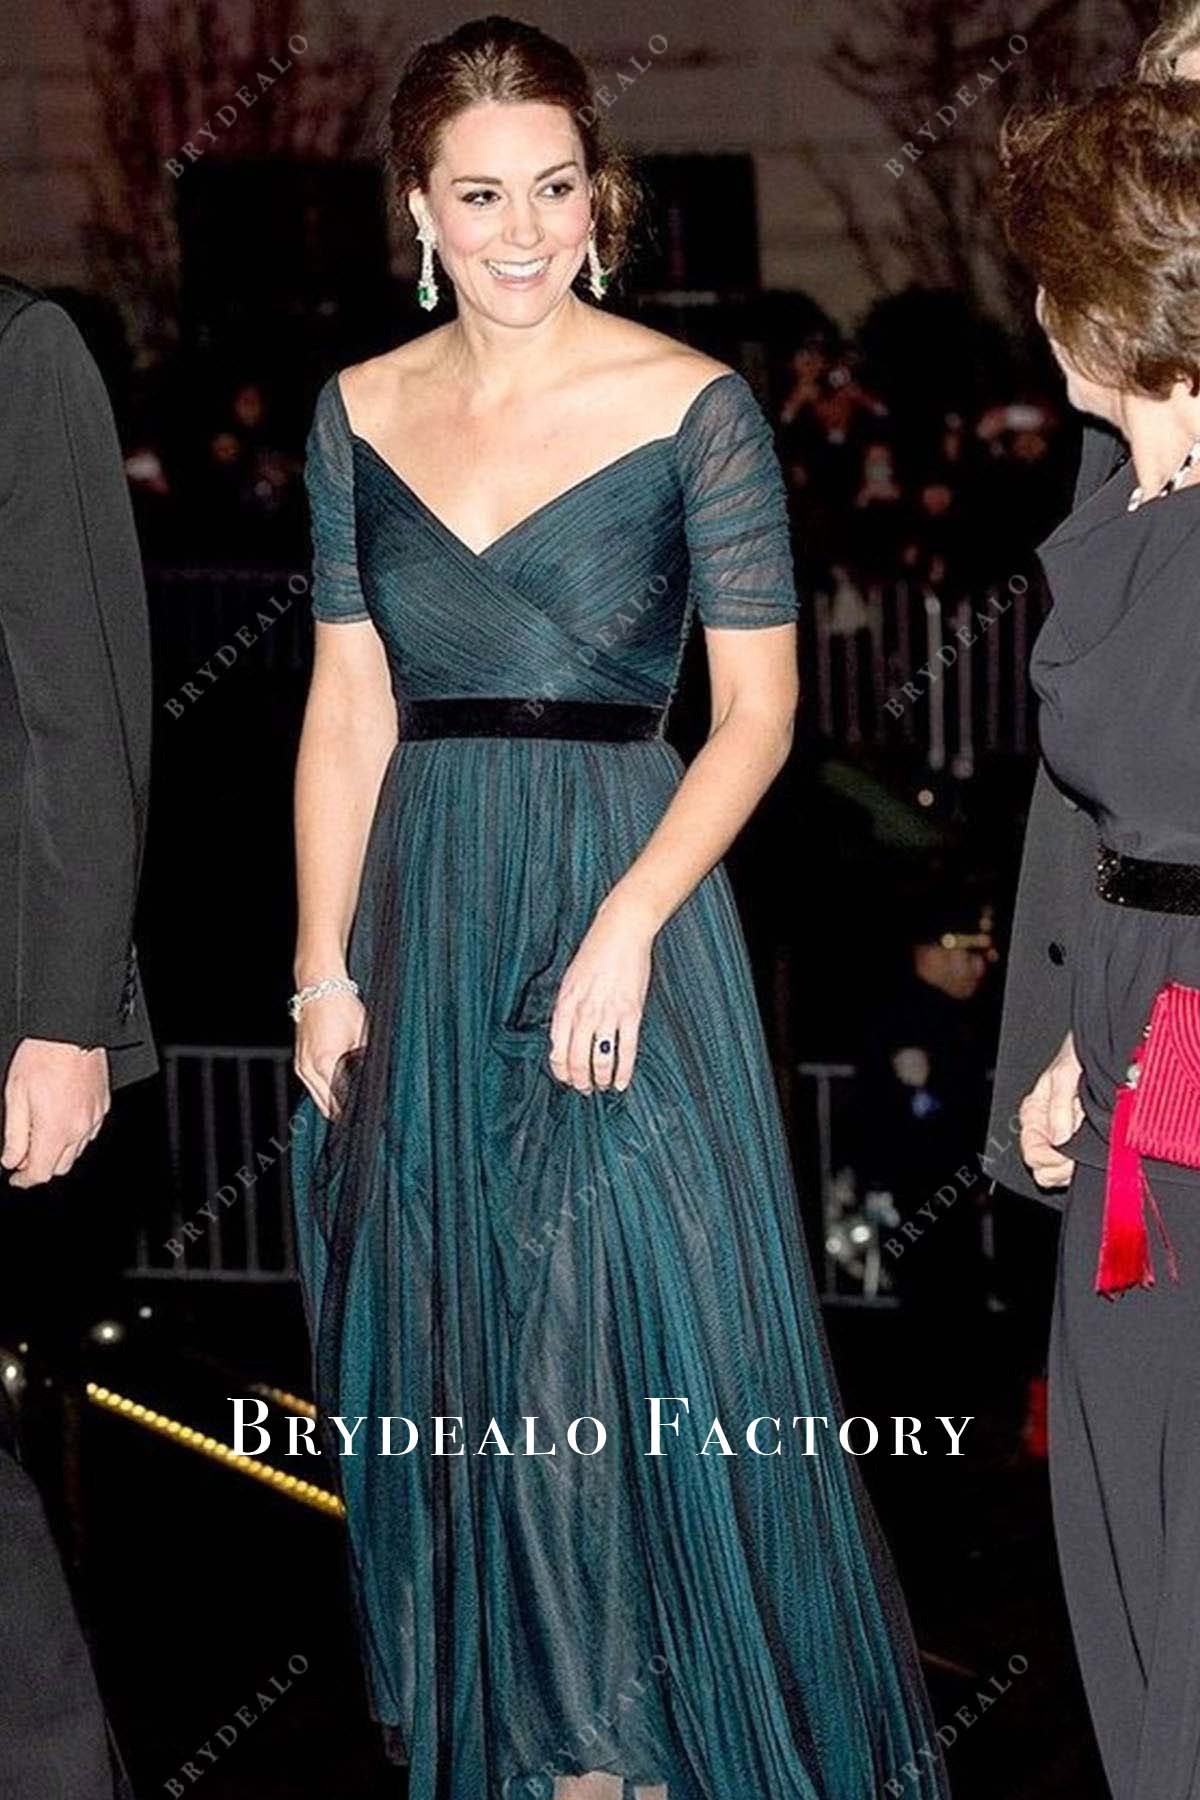 Kate Middleton Teal Dress First Official Appearance 2014